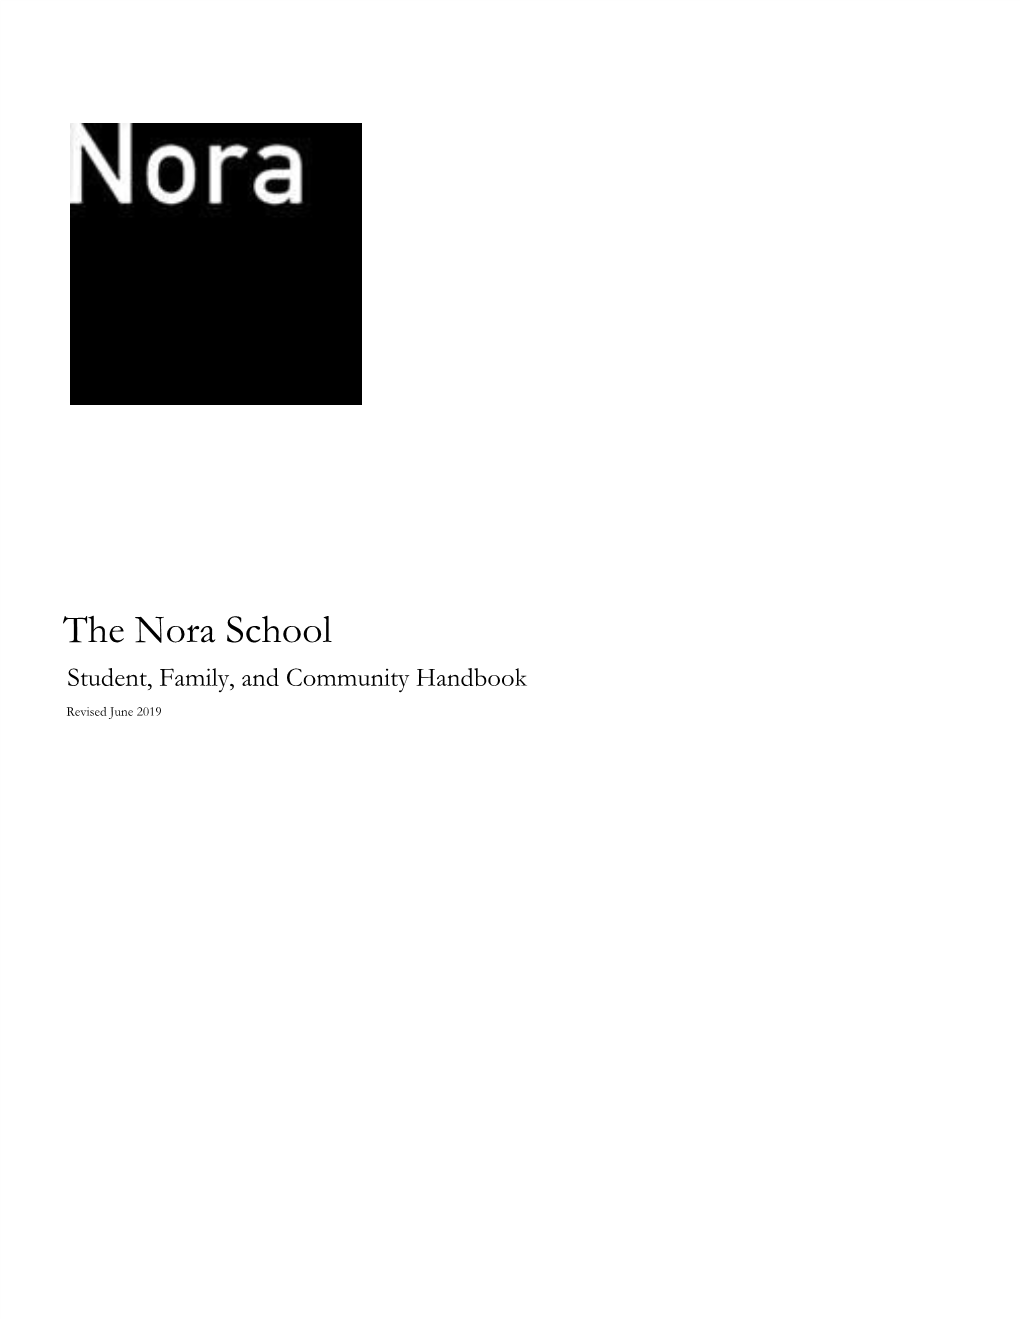 Students' Expectations of Themselves and Their Peers at the Nora School